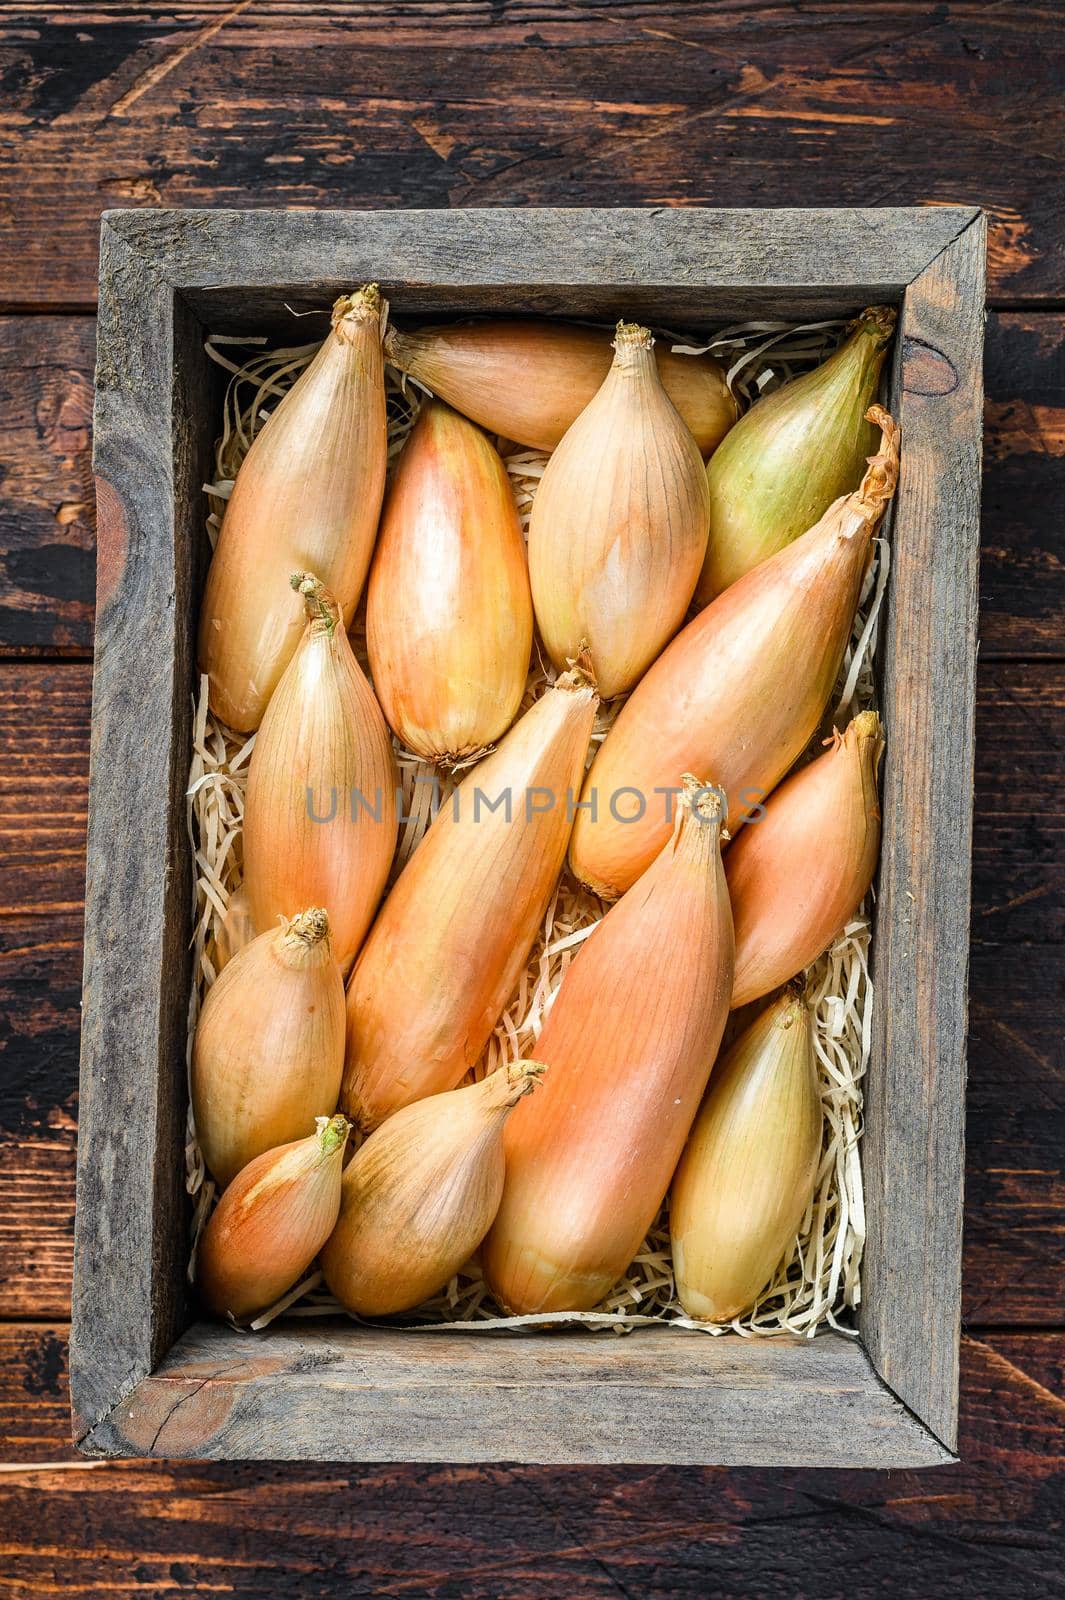 Raw Fresh Shallot onions Bulbs in a wooden market box. Dark Wooden background. Top view.